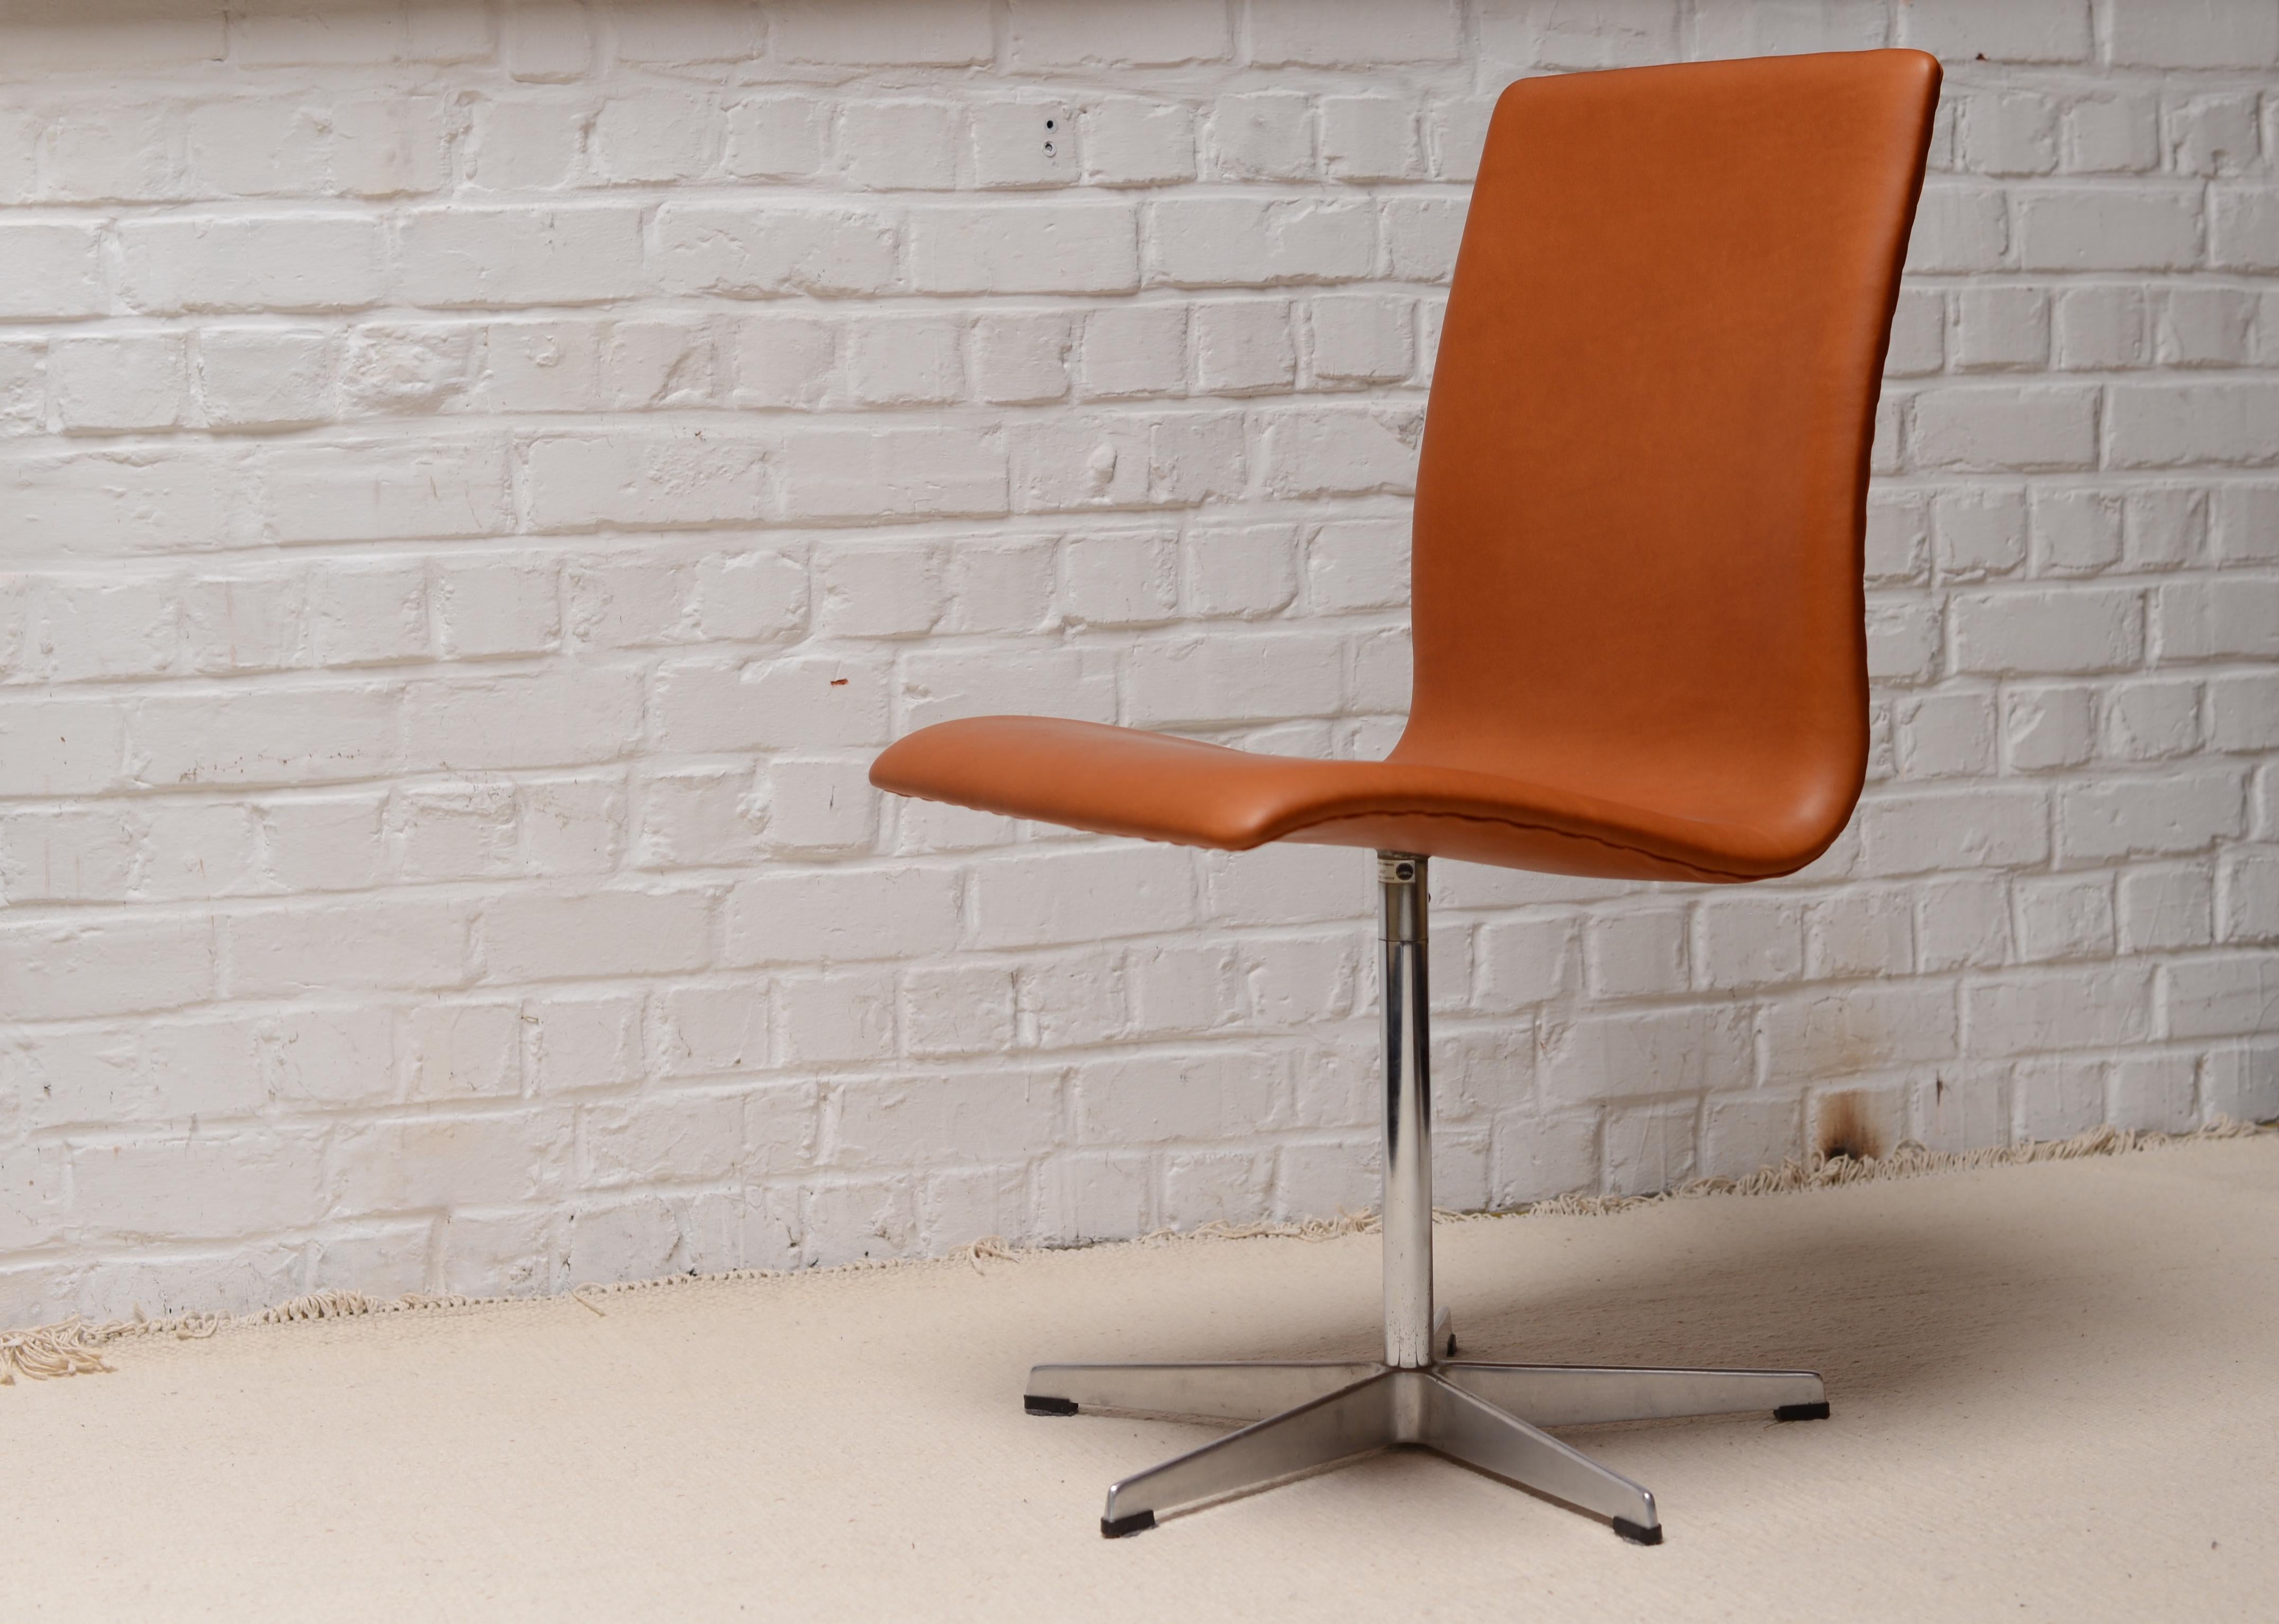 Original Oxford chair dated from march 1967 made by Fritz Hansen in Denmark. The chair was designed for the special commission of the St Catherine college in Oxford. It is made of plywood frame, leather and aluminum casted feet. The leather is brand